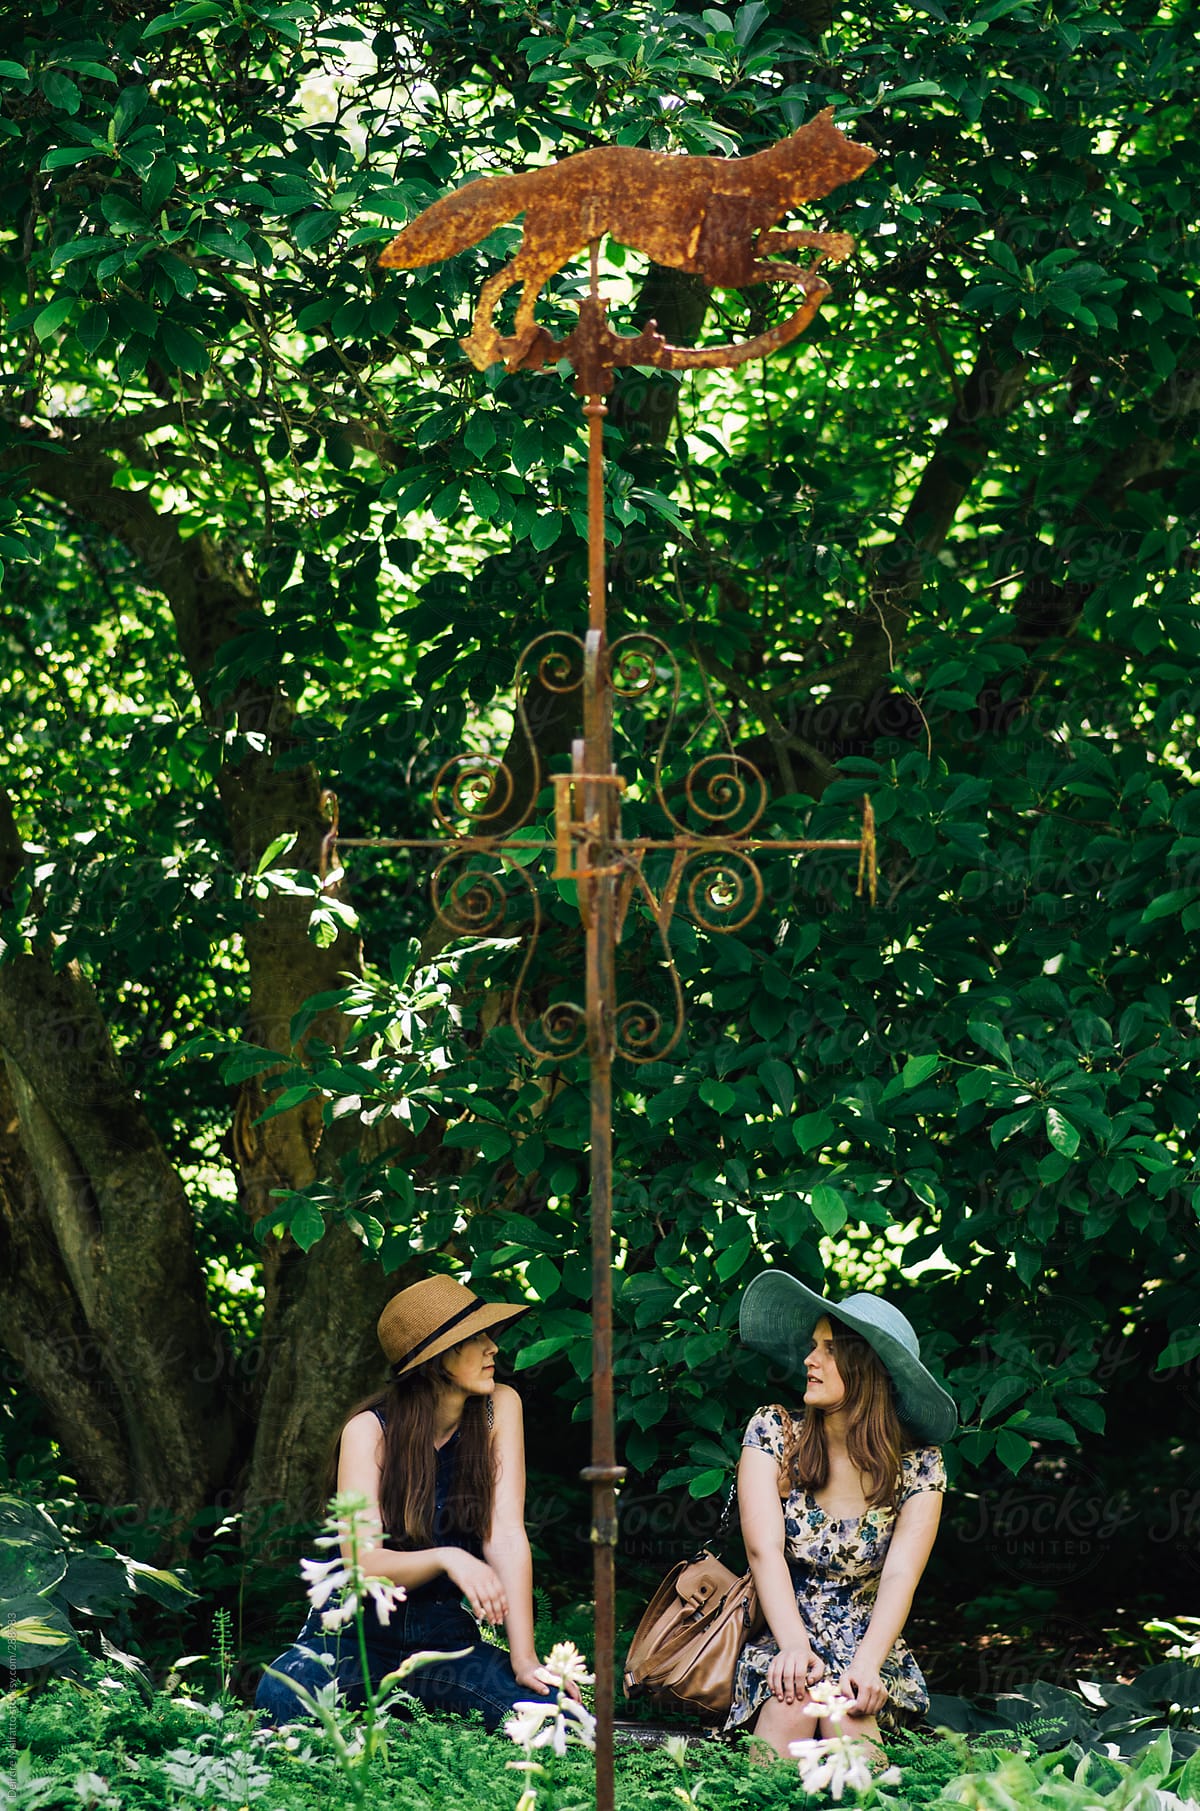 two young woman in hats talk in a garden under a weathervane